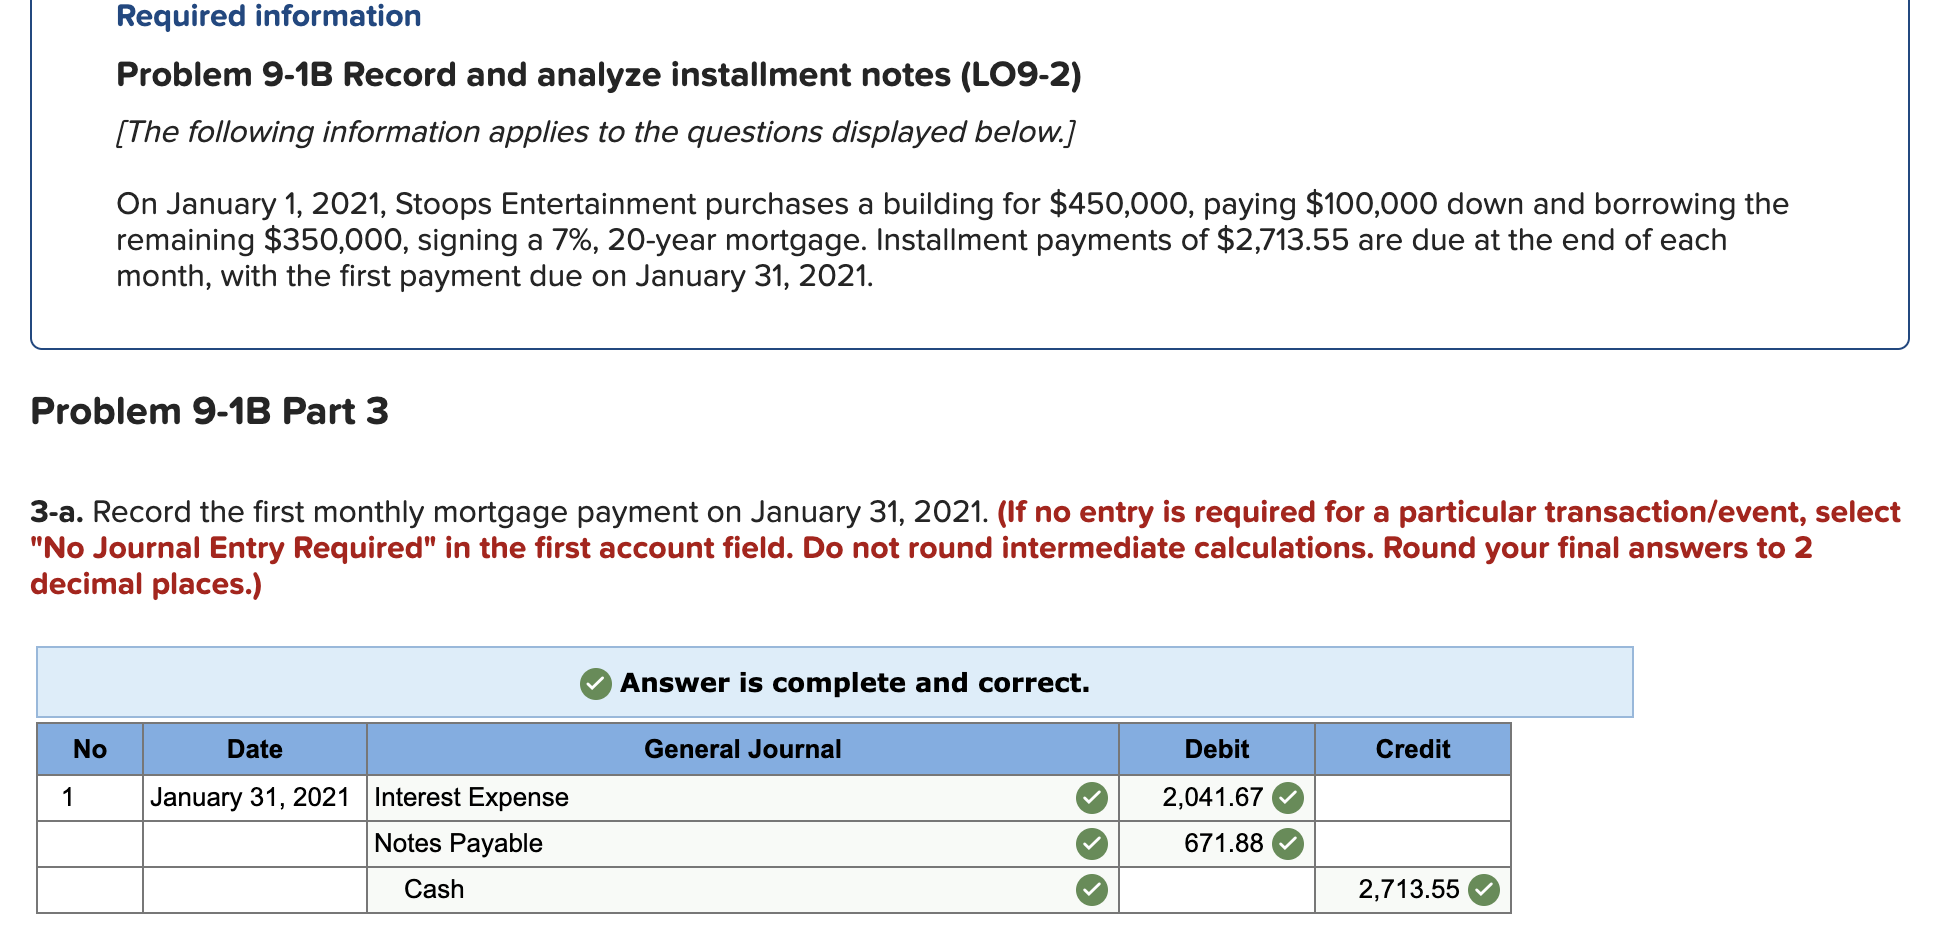 Required information
Problem 9-1B Record and analyze installment notes (LO9-2)
[The following information applies to the questions displayed below.]
On January 1, 2021, Stoops Entertainment purchases a building for $450,000, paying $100,000 down and borrowing the
remaining $350,000, signing a 7%, 20-year mortgage. Installment payments of $2,713.55 are due at the end of each
month, with the first payment due on January 31, 2021.
Problem 9-1B Part 3
3-a. Record the first monthly mortgage payment on January 31, 2021. (If no entry is required for a particular transaction/event, select
"No Journal Entry Required" in the first account field. Do not round intermediate calculations. Round your final answers to 2
decimal places.)
Answer is complete and correct.
No
Date
General Journal
Debit
Credit
January 31, 2021 Interest Expense
2,041.67
Notes Payable
671.88
Cash
2,713.55
